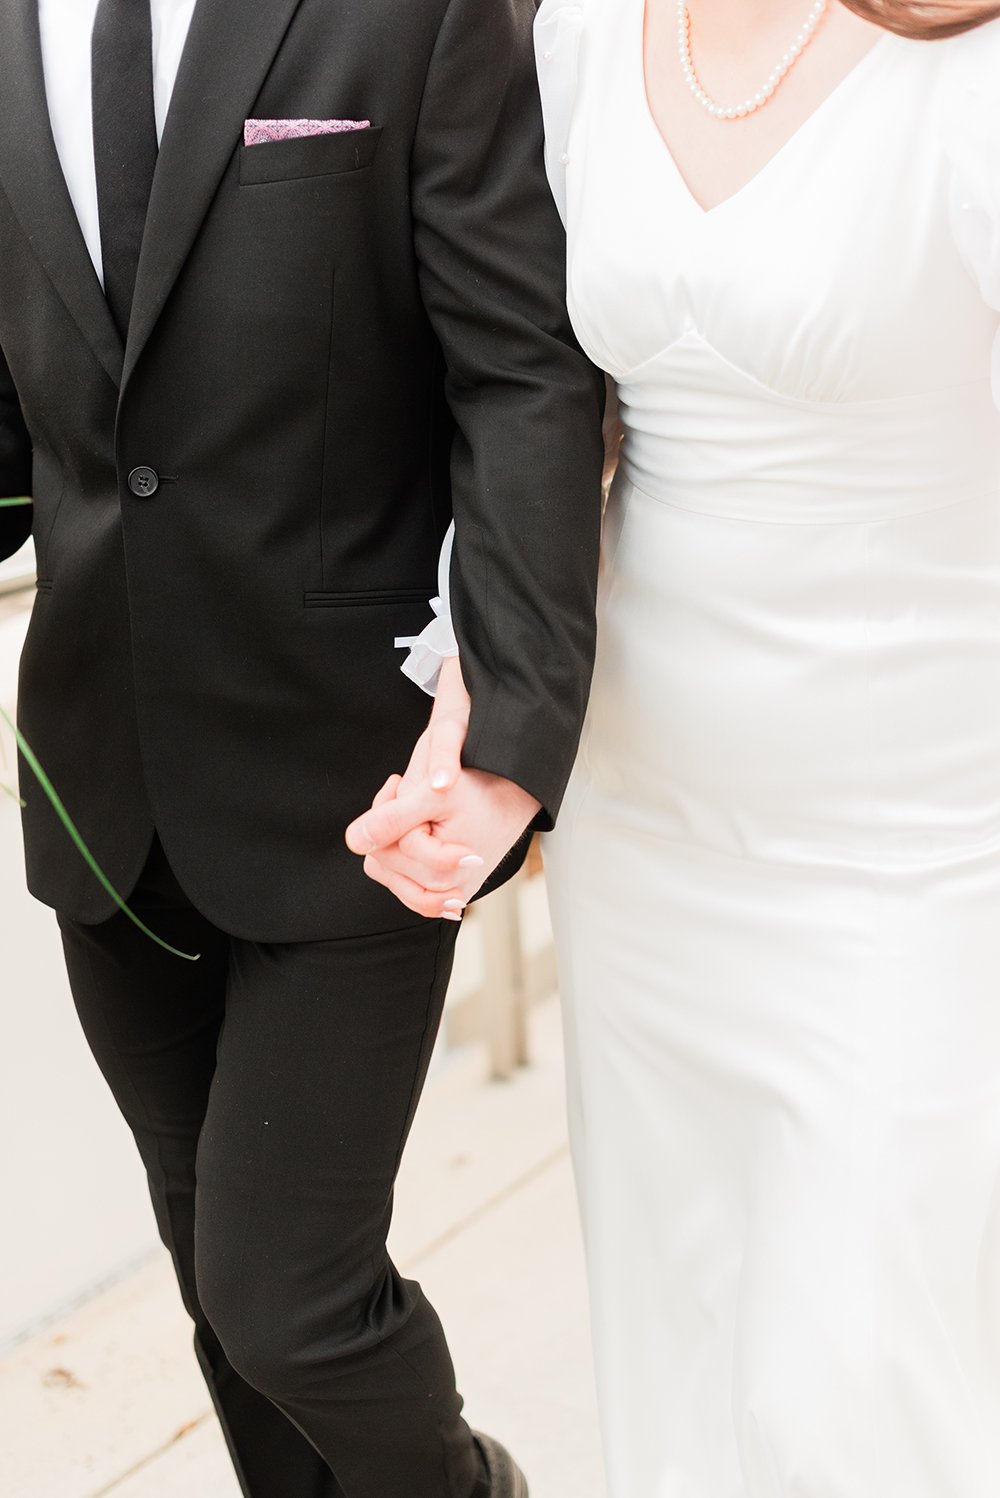  A husband and wife holding hands is the focus of this wedding photo captured by Jacquie Erickson. Holding hands wedding photographer Sharpsburg Roswell #weddingphotographer #ldsweddings #atlantatemple #jacquieerickson #newlyweds 